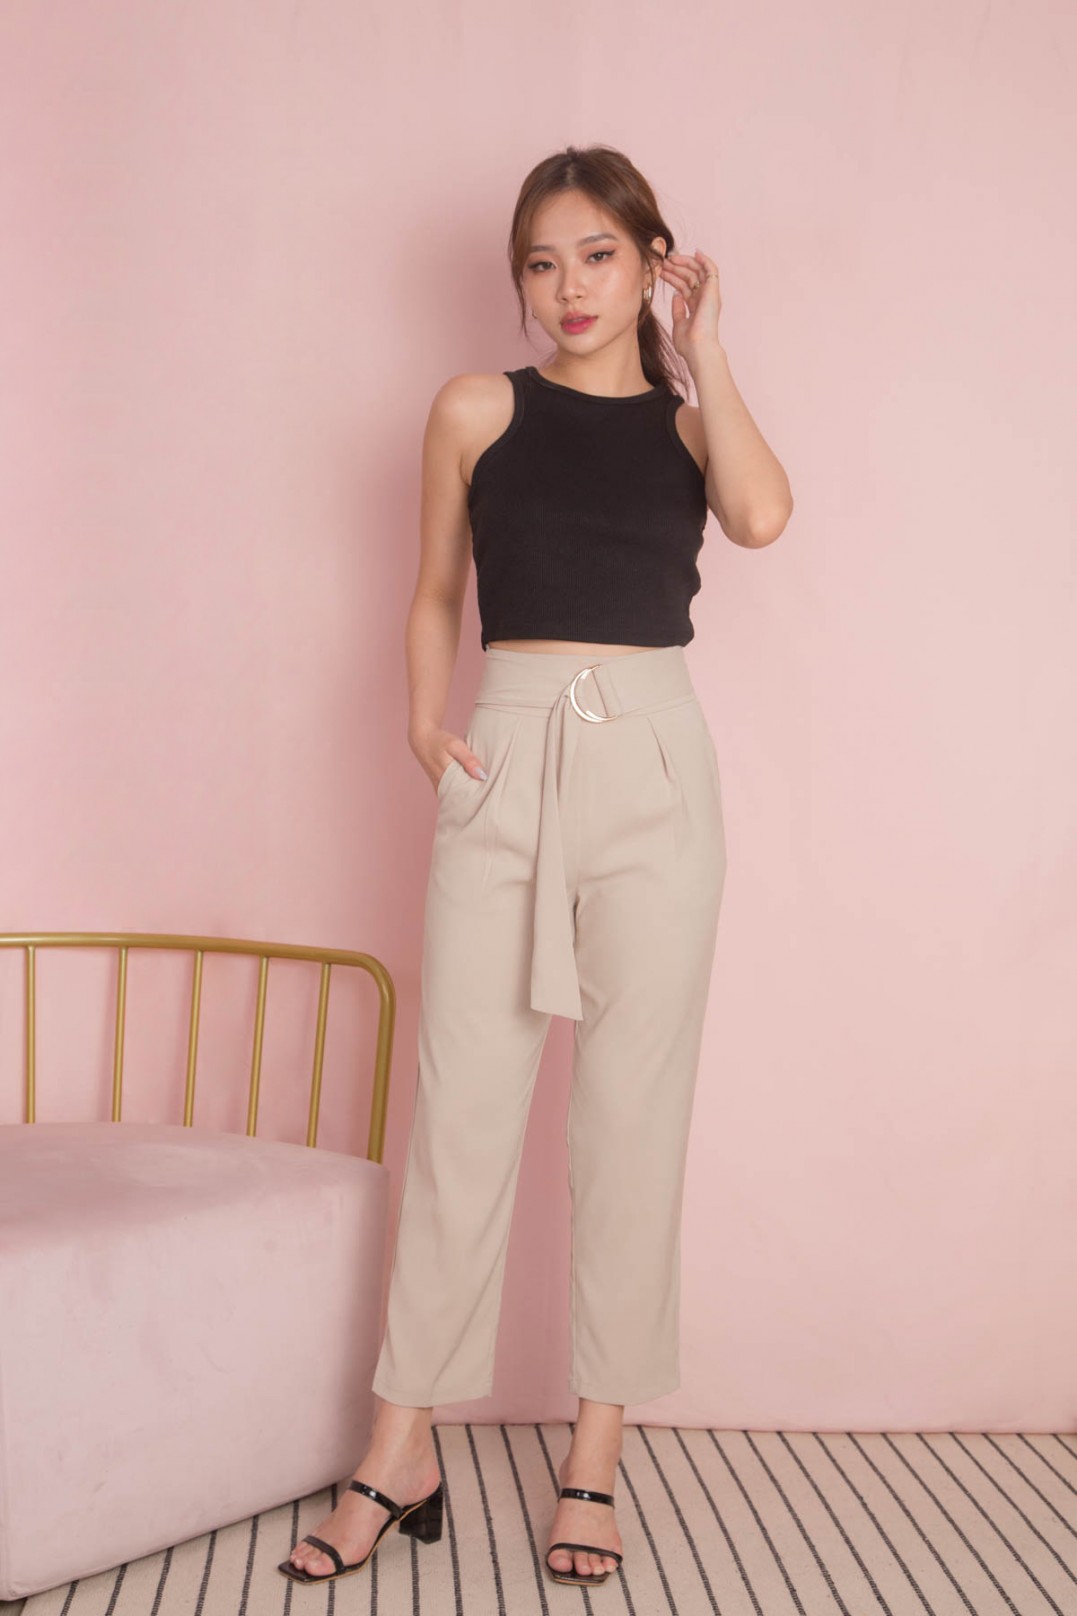 Buy Women's Casual Trousers High Waist Pure Color Belt Fold Wide Leg Pants  Navy at Amazon.in